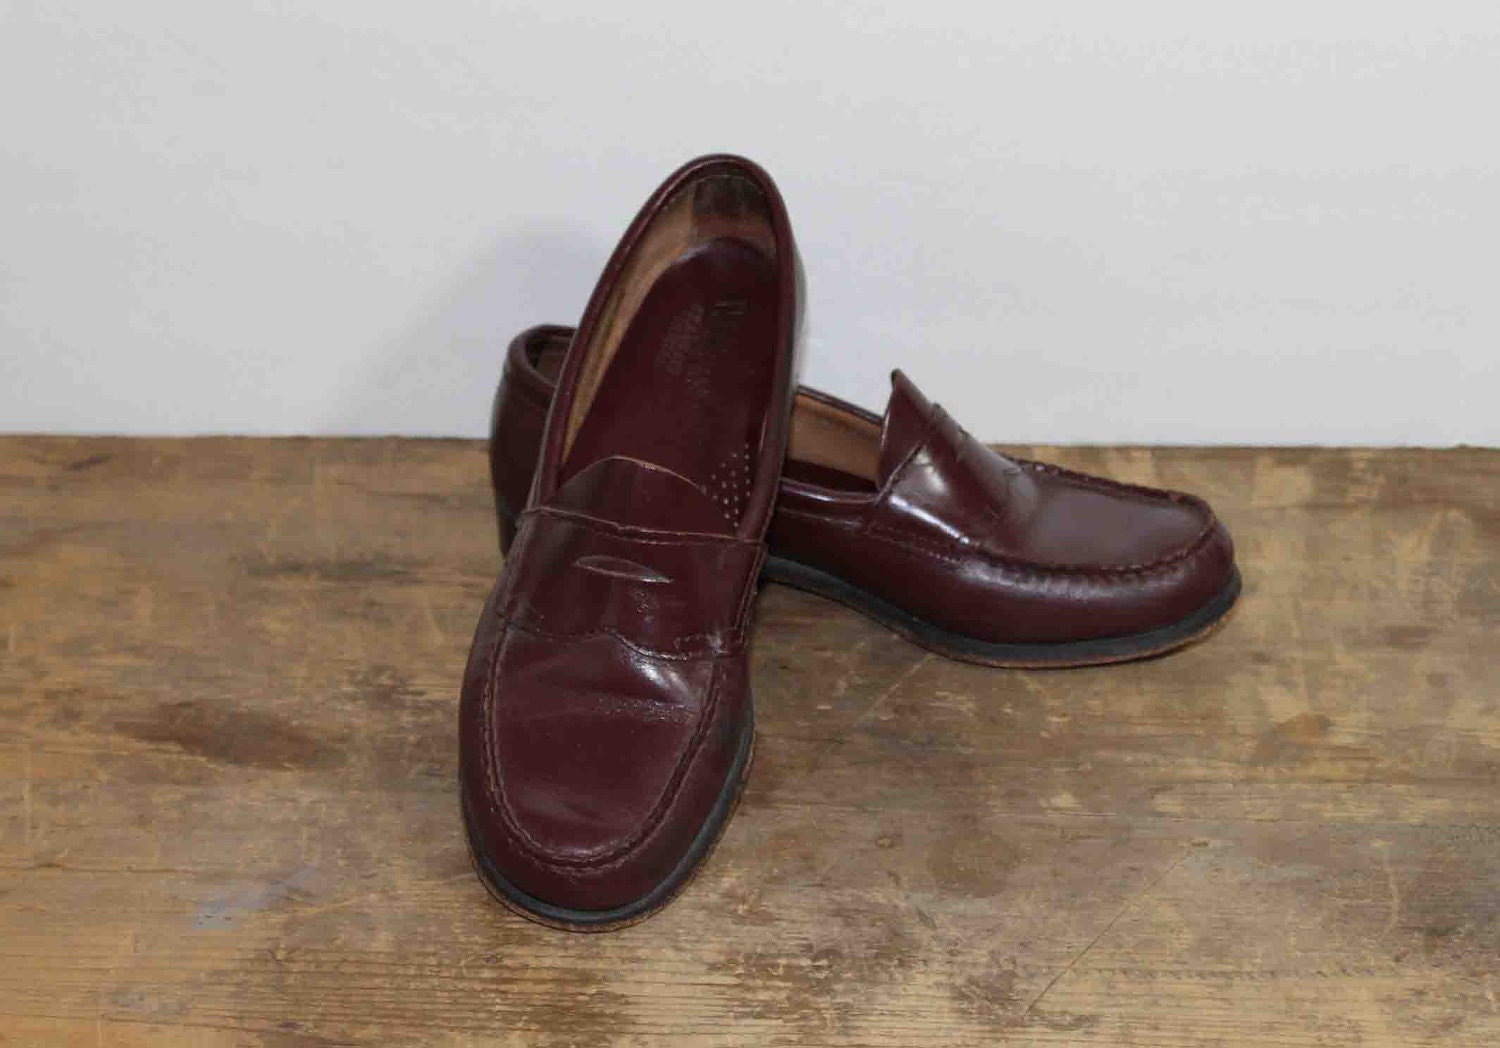 1960s Vintage Oxblood Penny Loafers G.H. Bass by RewindClothing